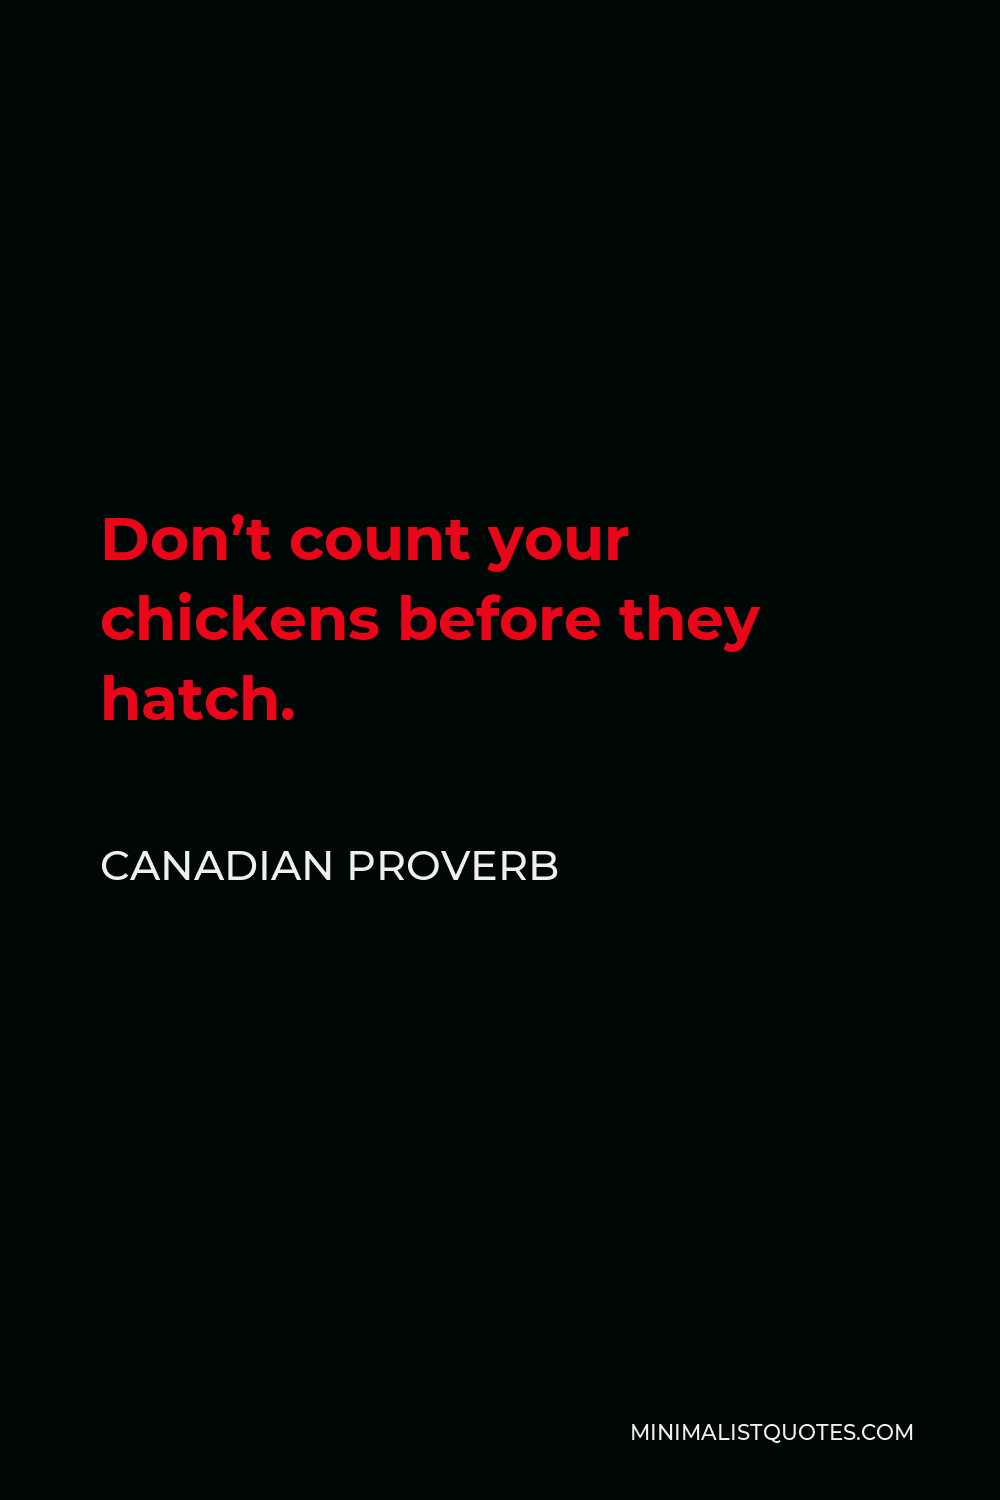 Canadian Proverb Quote - Don’t count your chickens before they hatch.